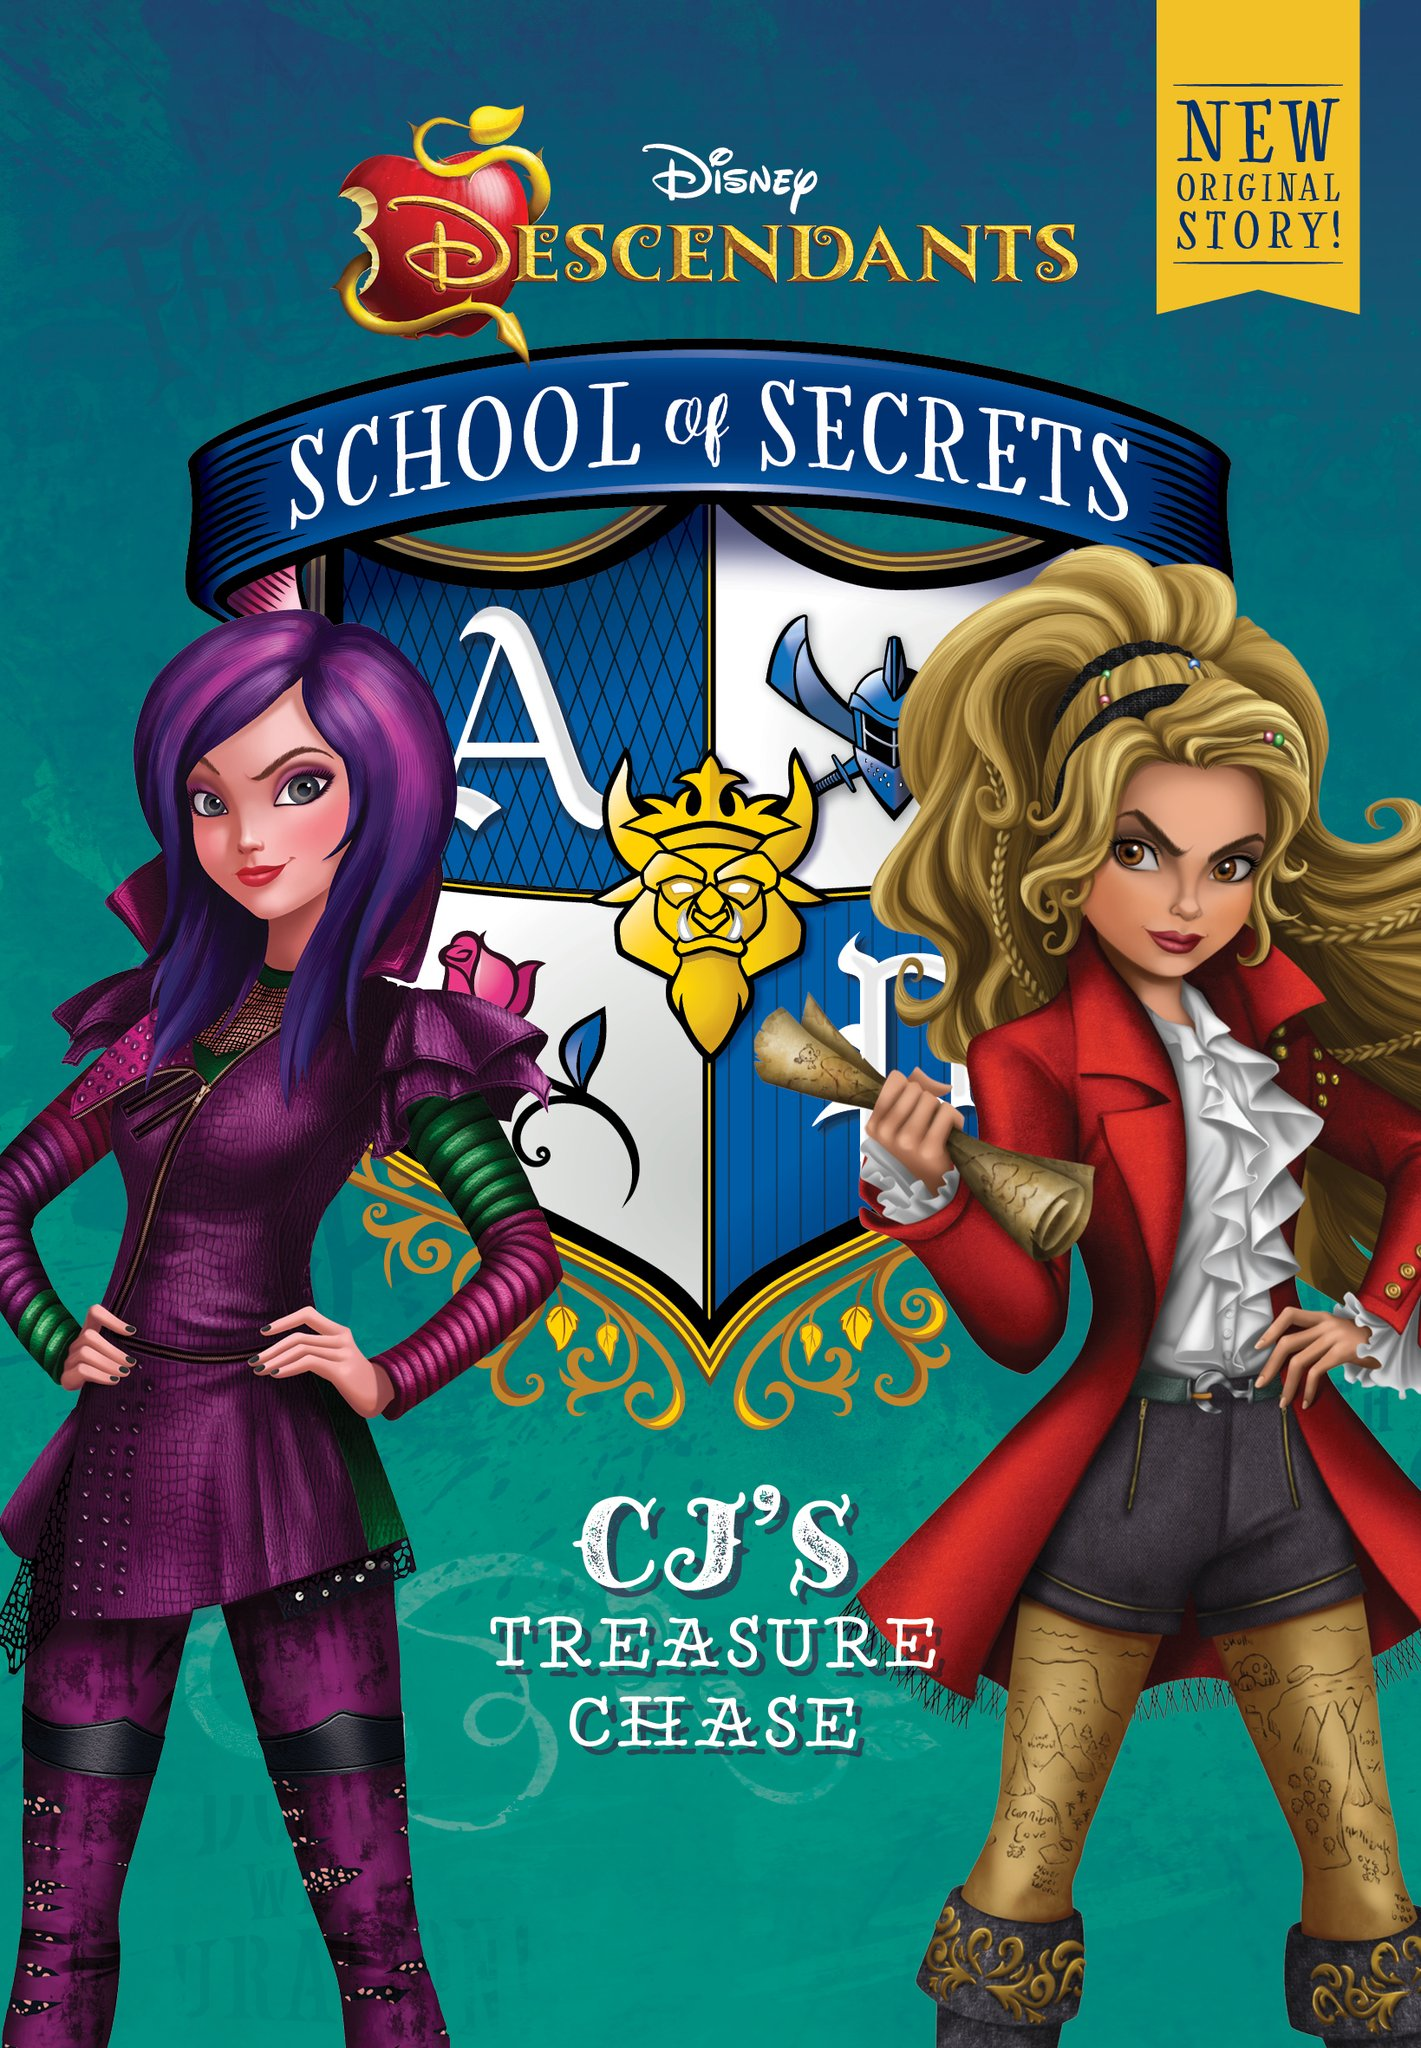 Other, The 4 Descendants Book From The Series